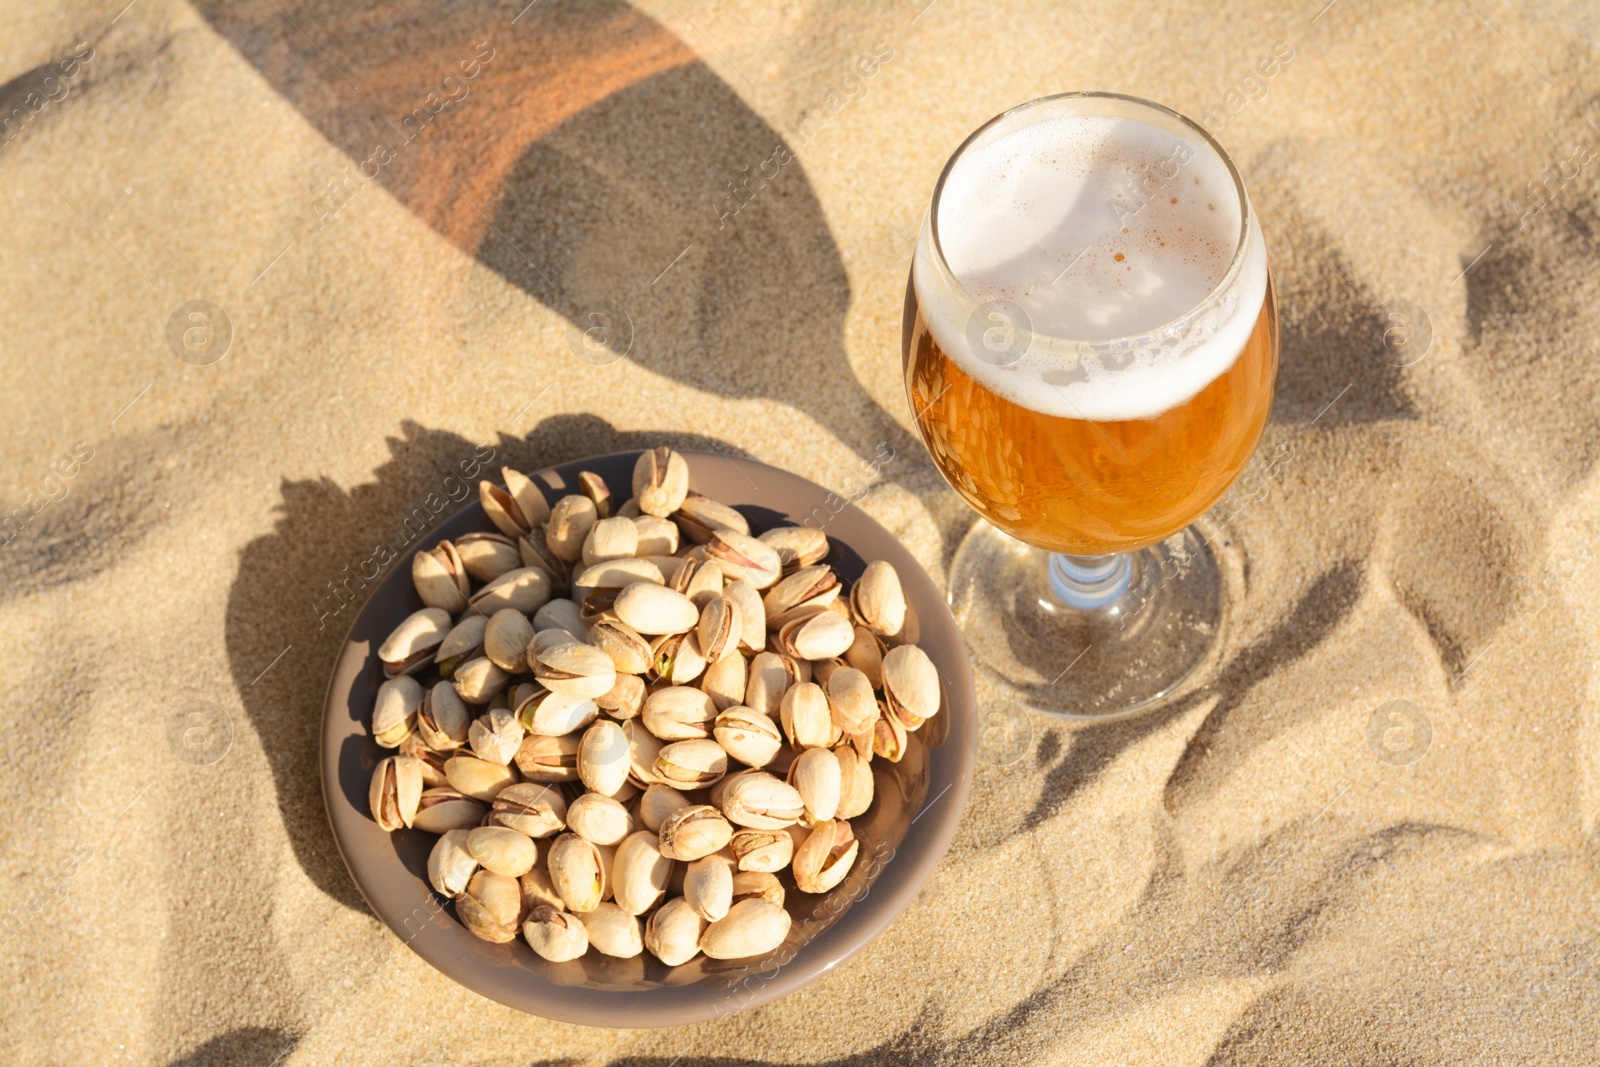 Photo of Glass of cold beer and pistachios on sandy beach, above view